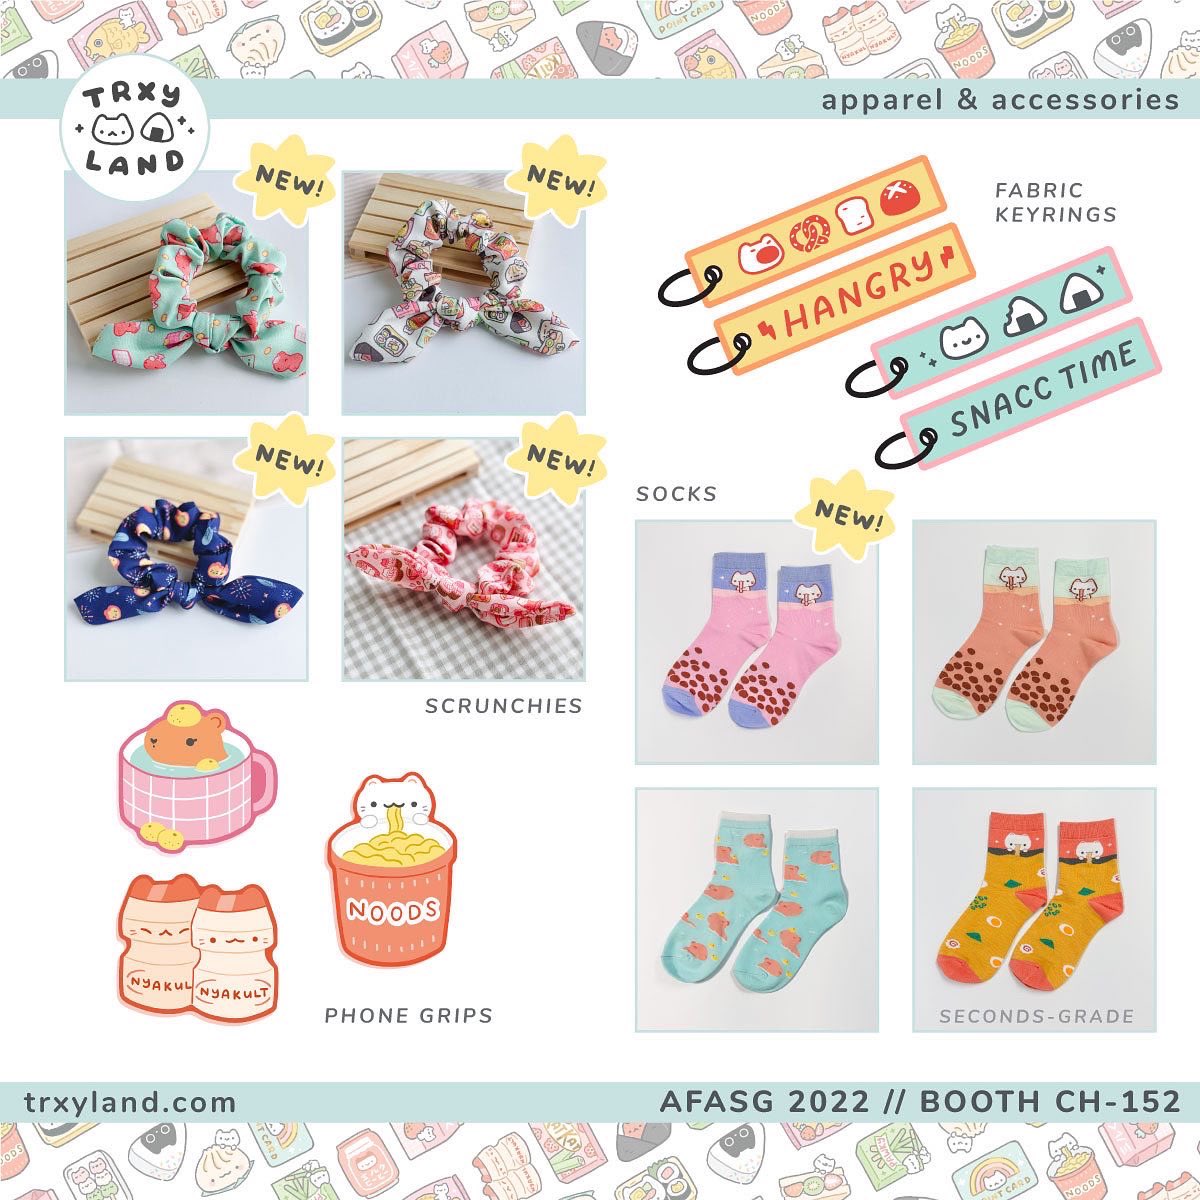 I made a catalog for AFASG this weekend! Will post a separate one for the online shop update soon 

1/2 